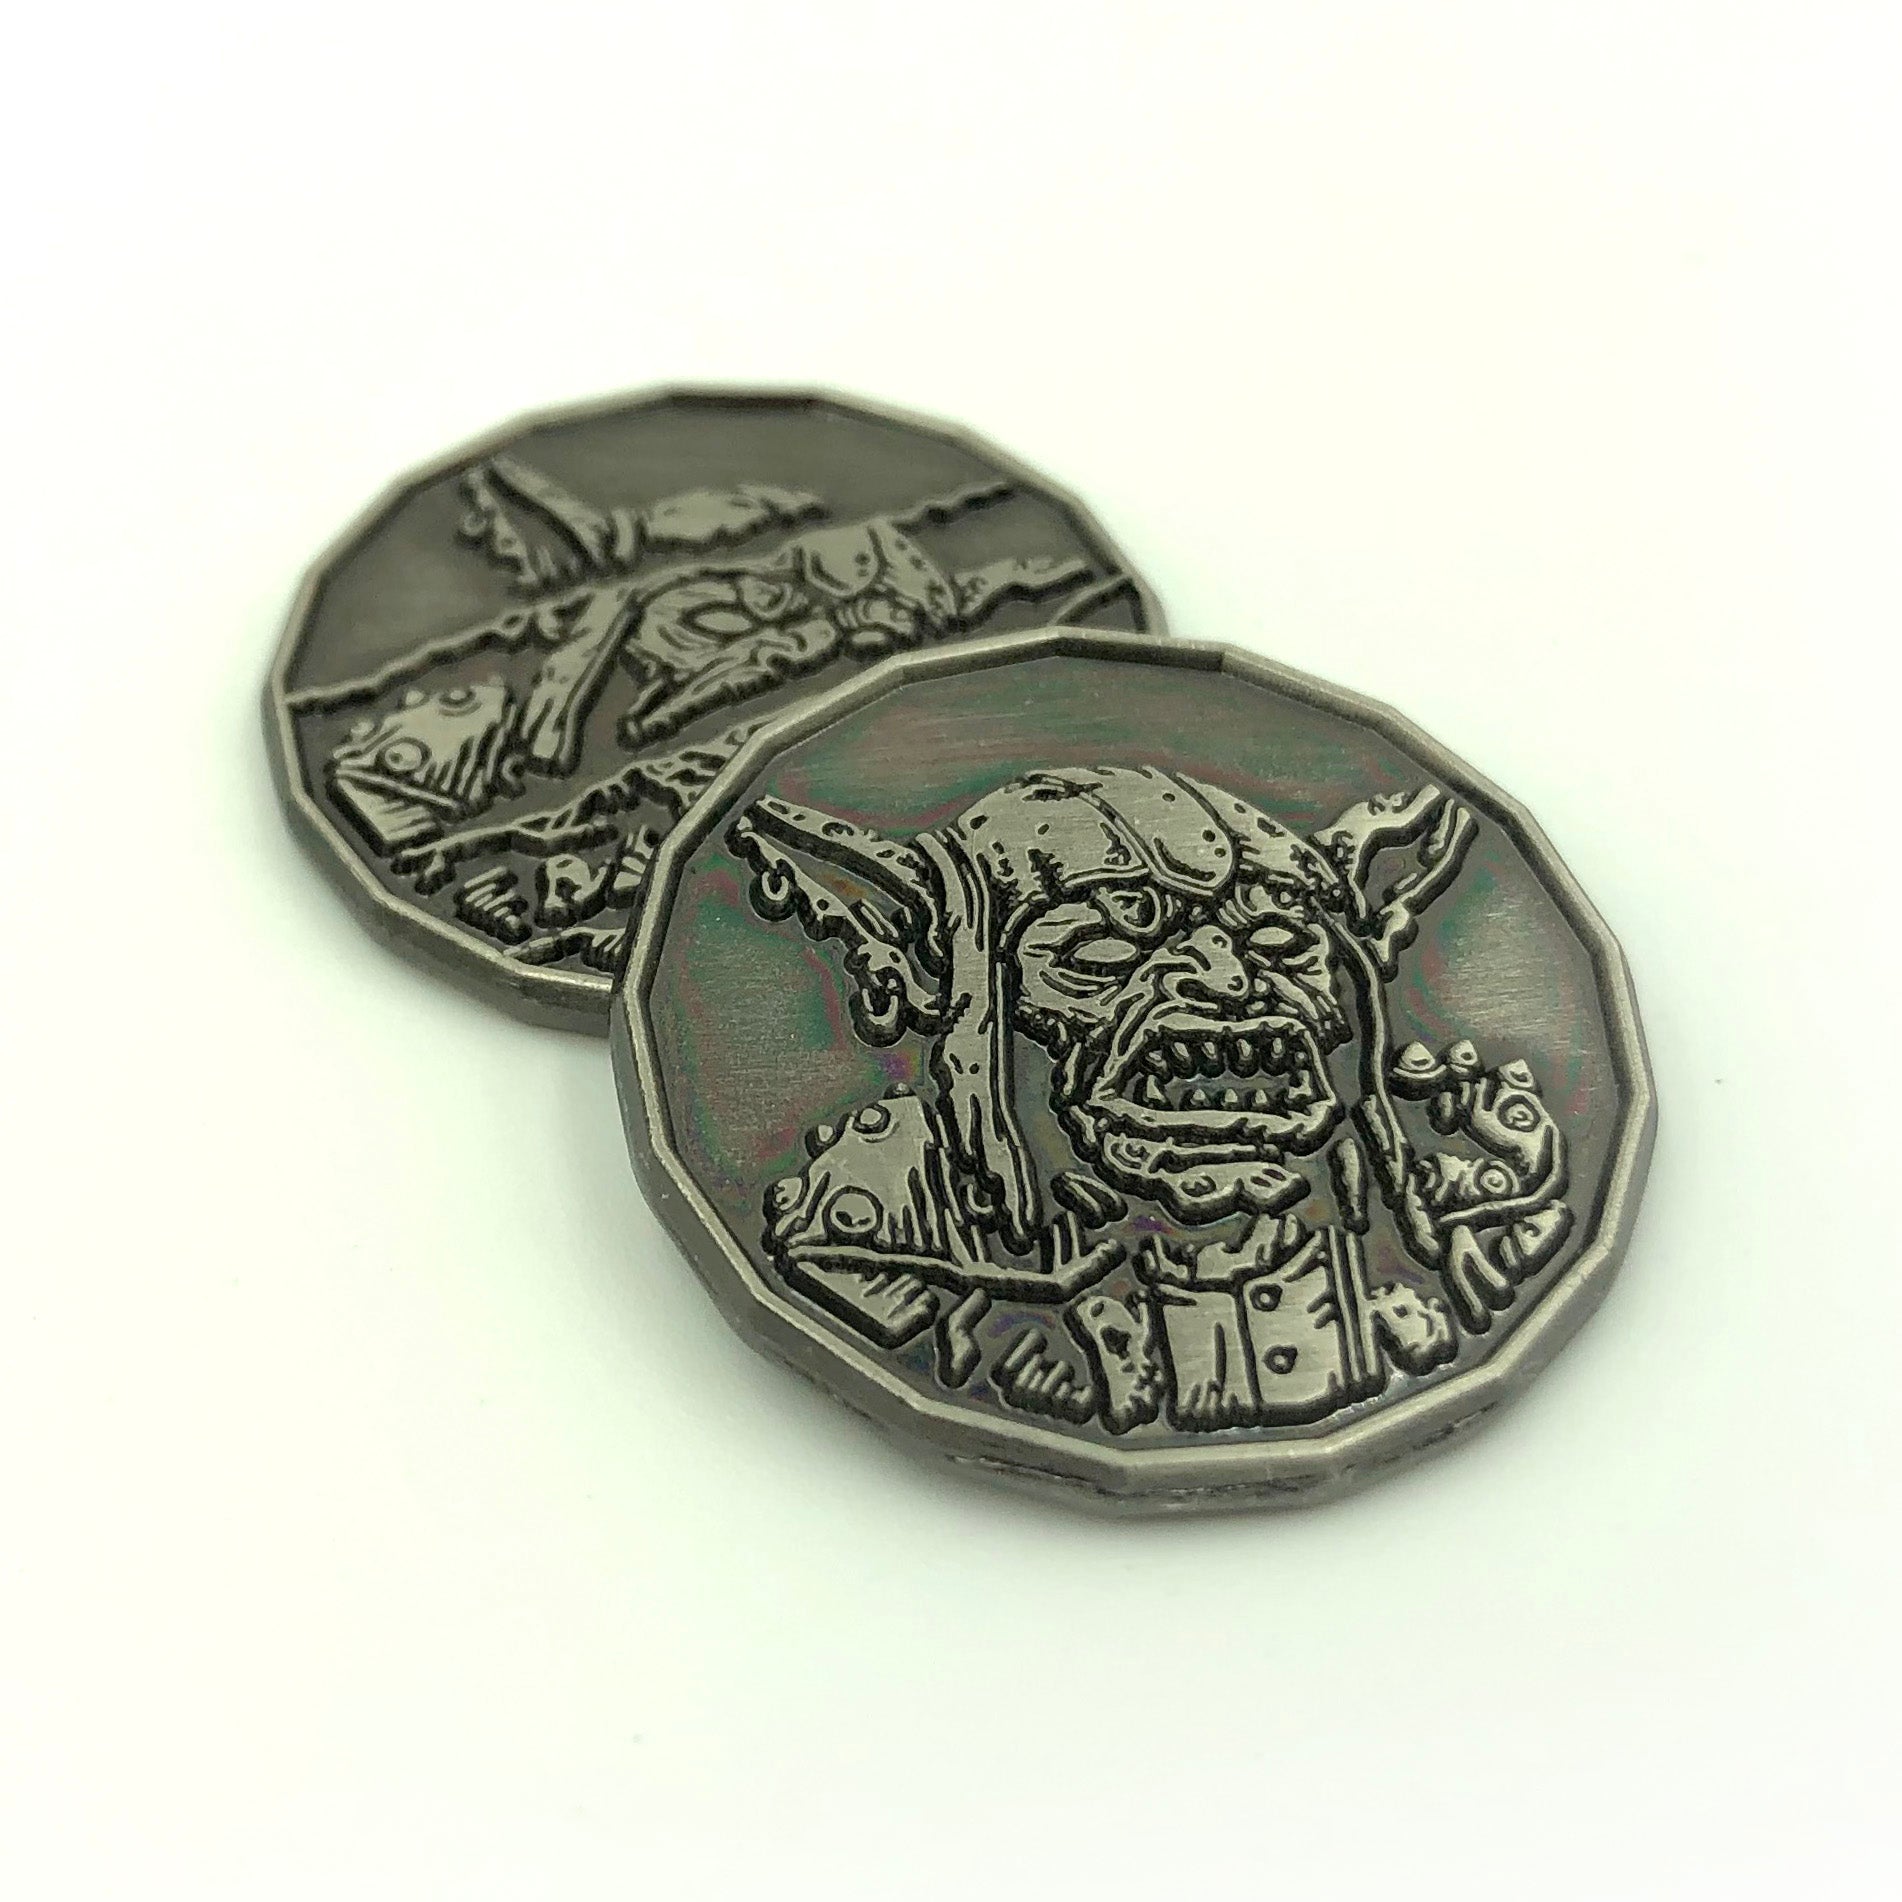 Goblin Monster Coin Miniature - Front and Back